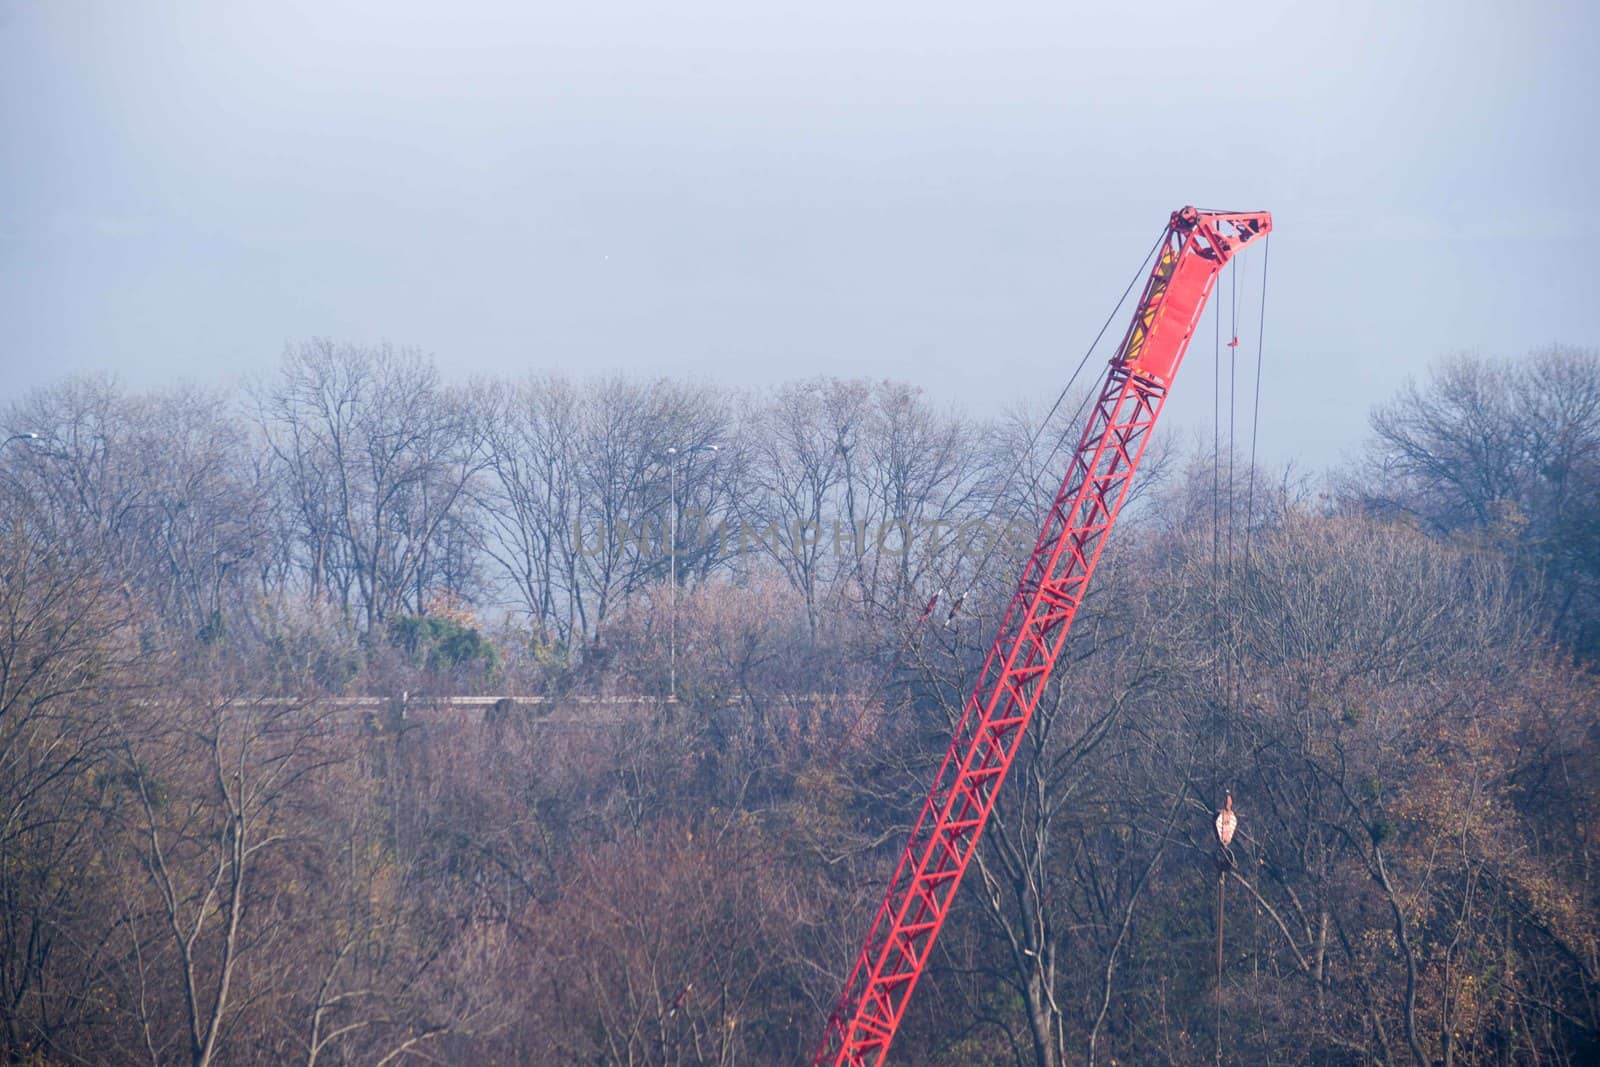 Construction process with construction automotive crane with red gibbet. Autumn fog and river bridge  on blurred background. Forest around crane.